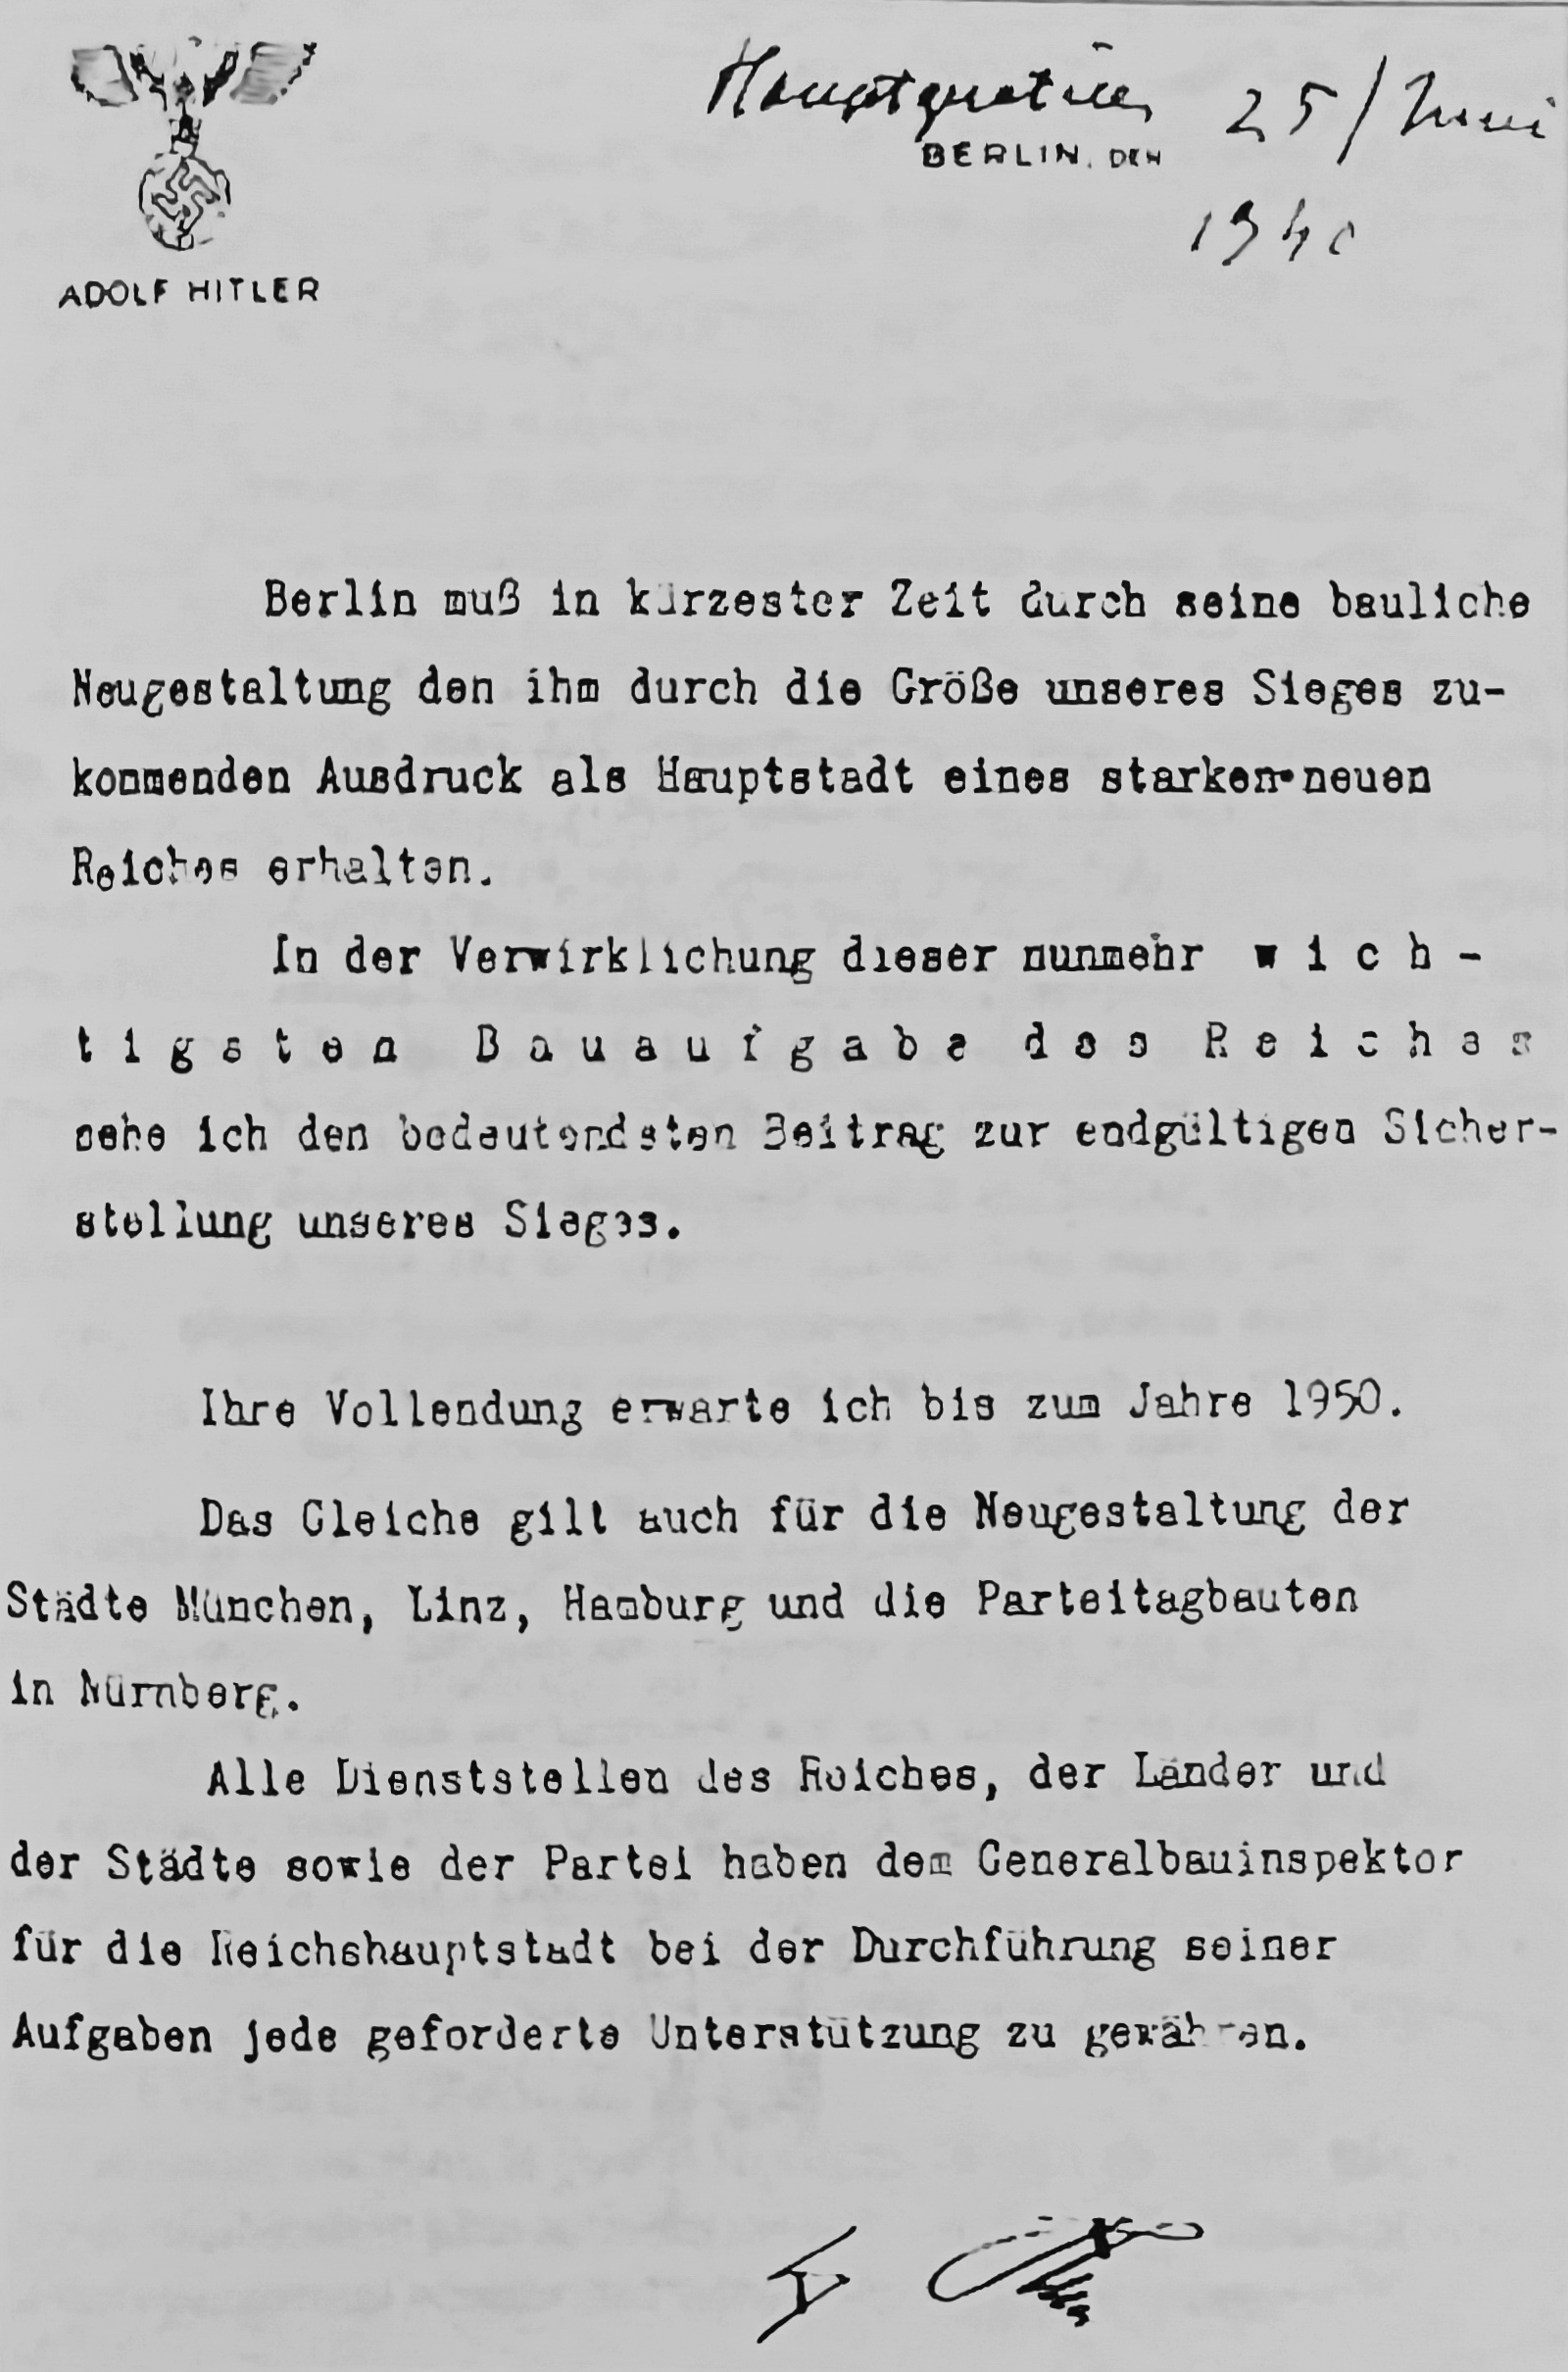 Following the victory in the west, Adolf Hitler asks for the resumption of work on the new architectural layout of Berlin, Munich, Hamburg, Linz and Nuremberg